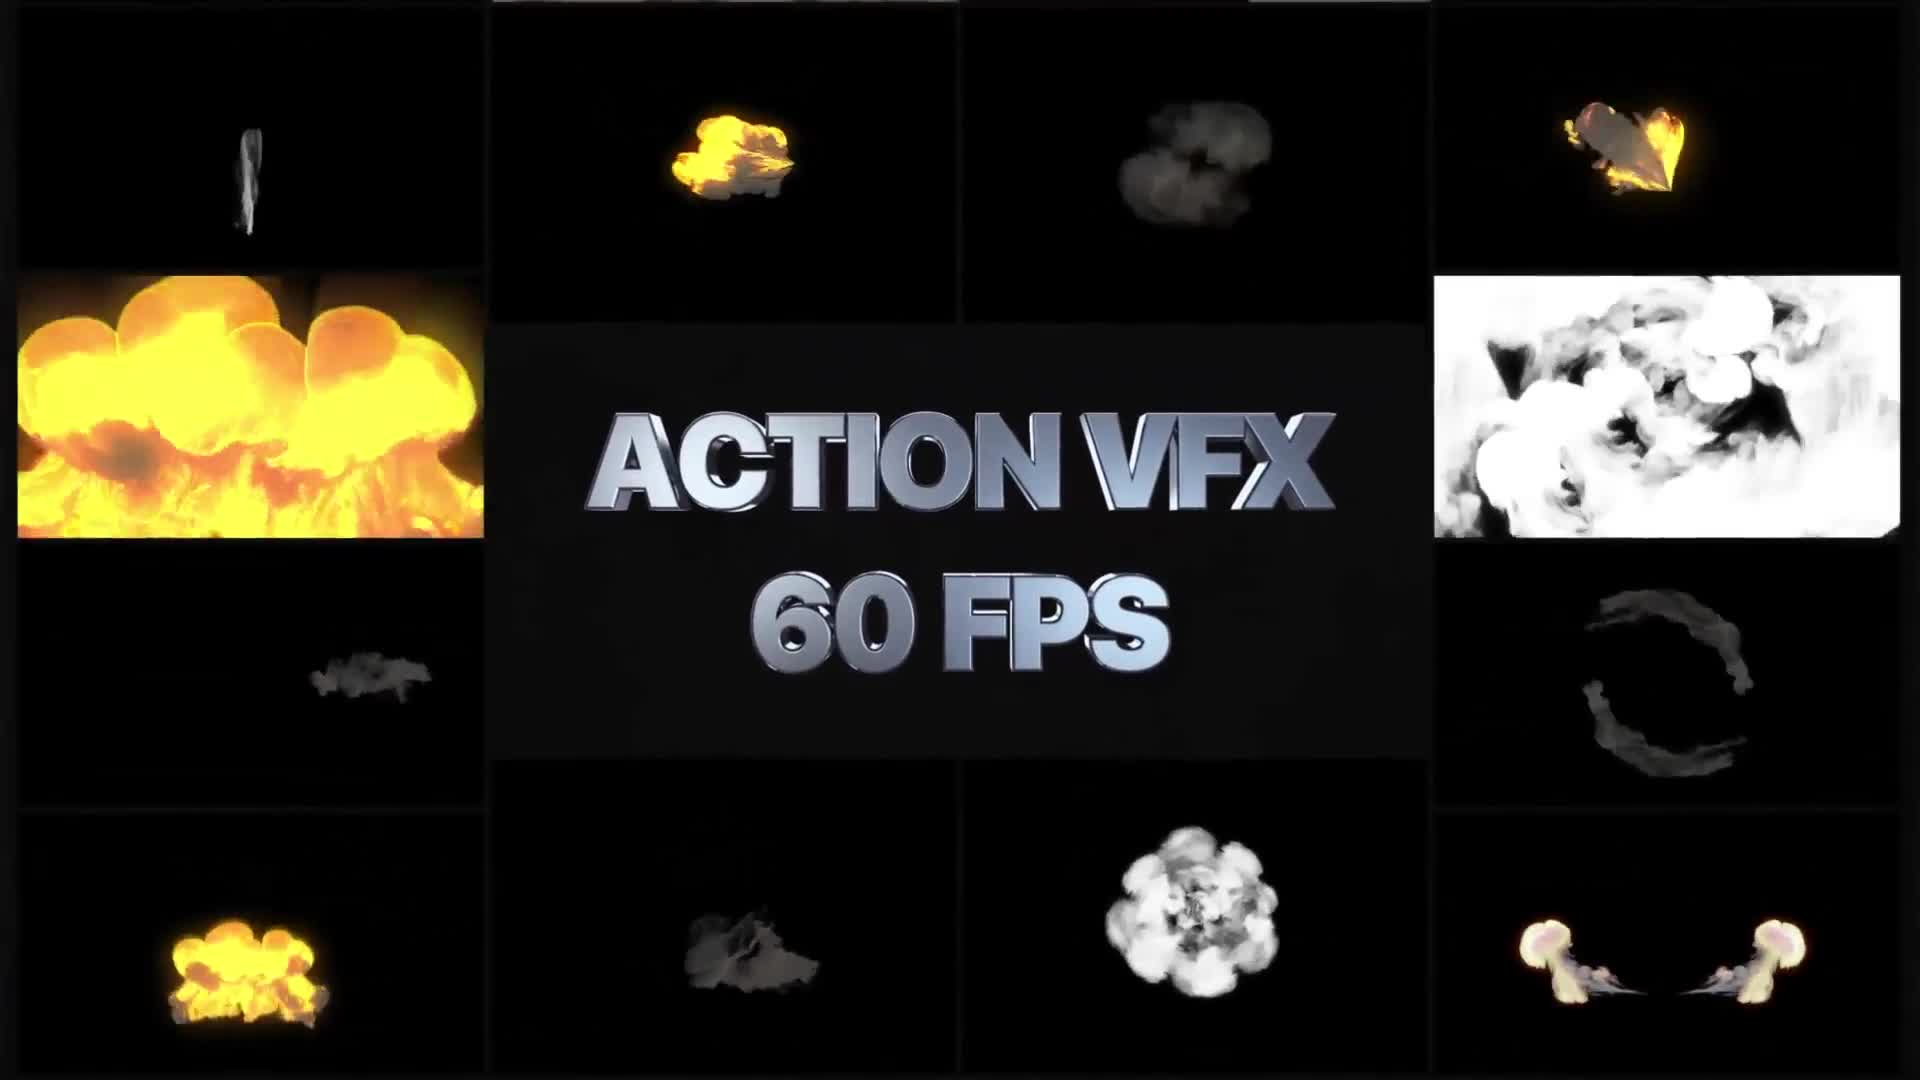 vfx after effects download